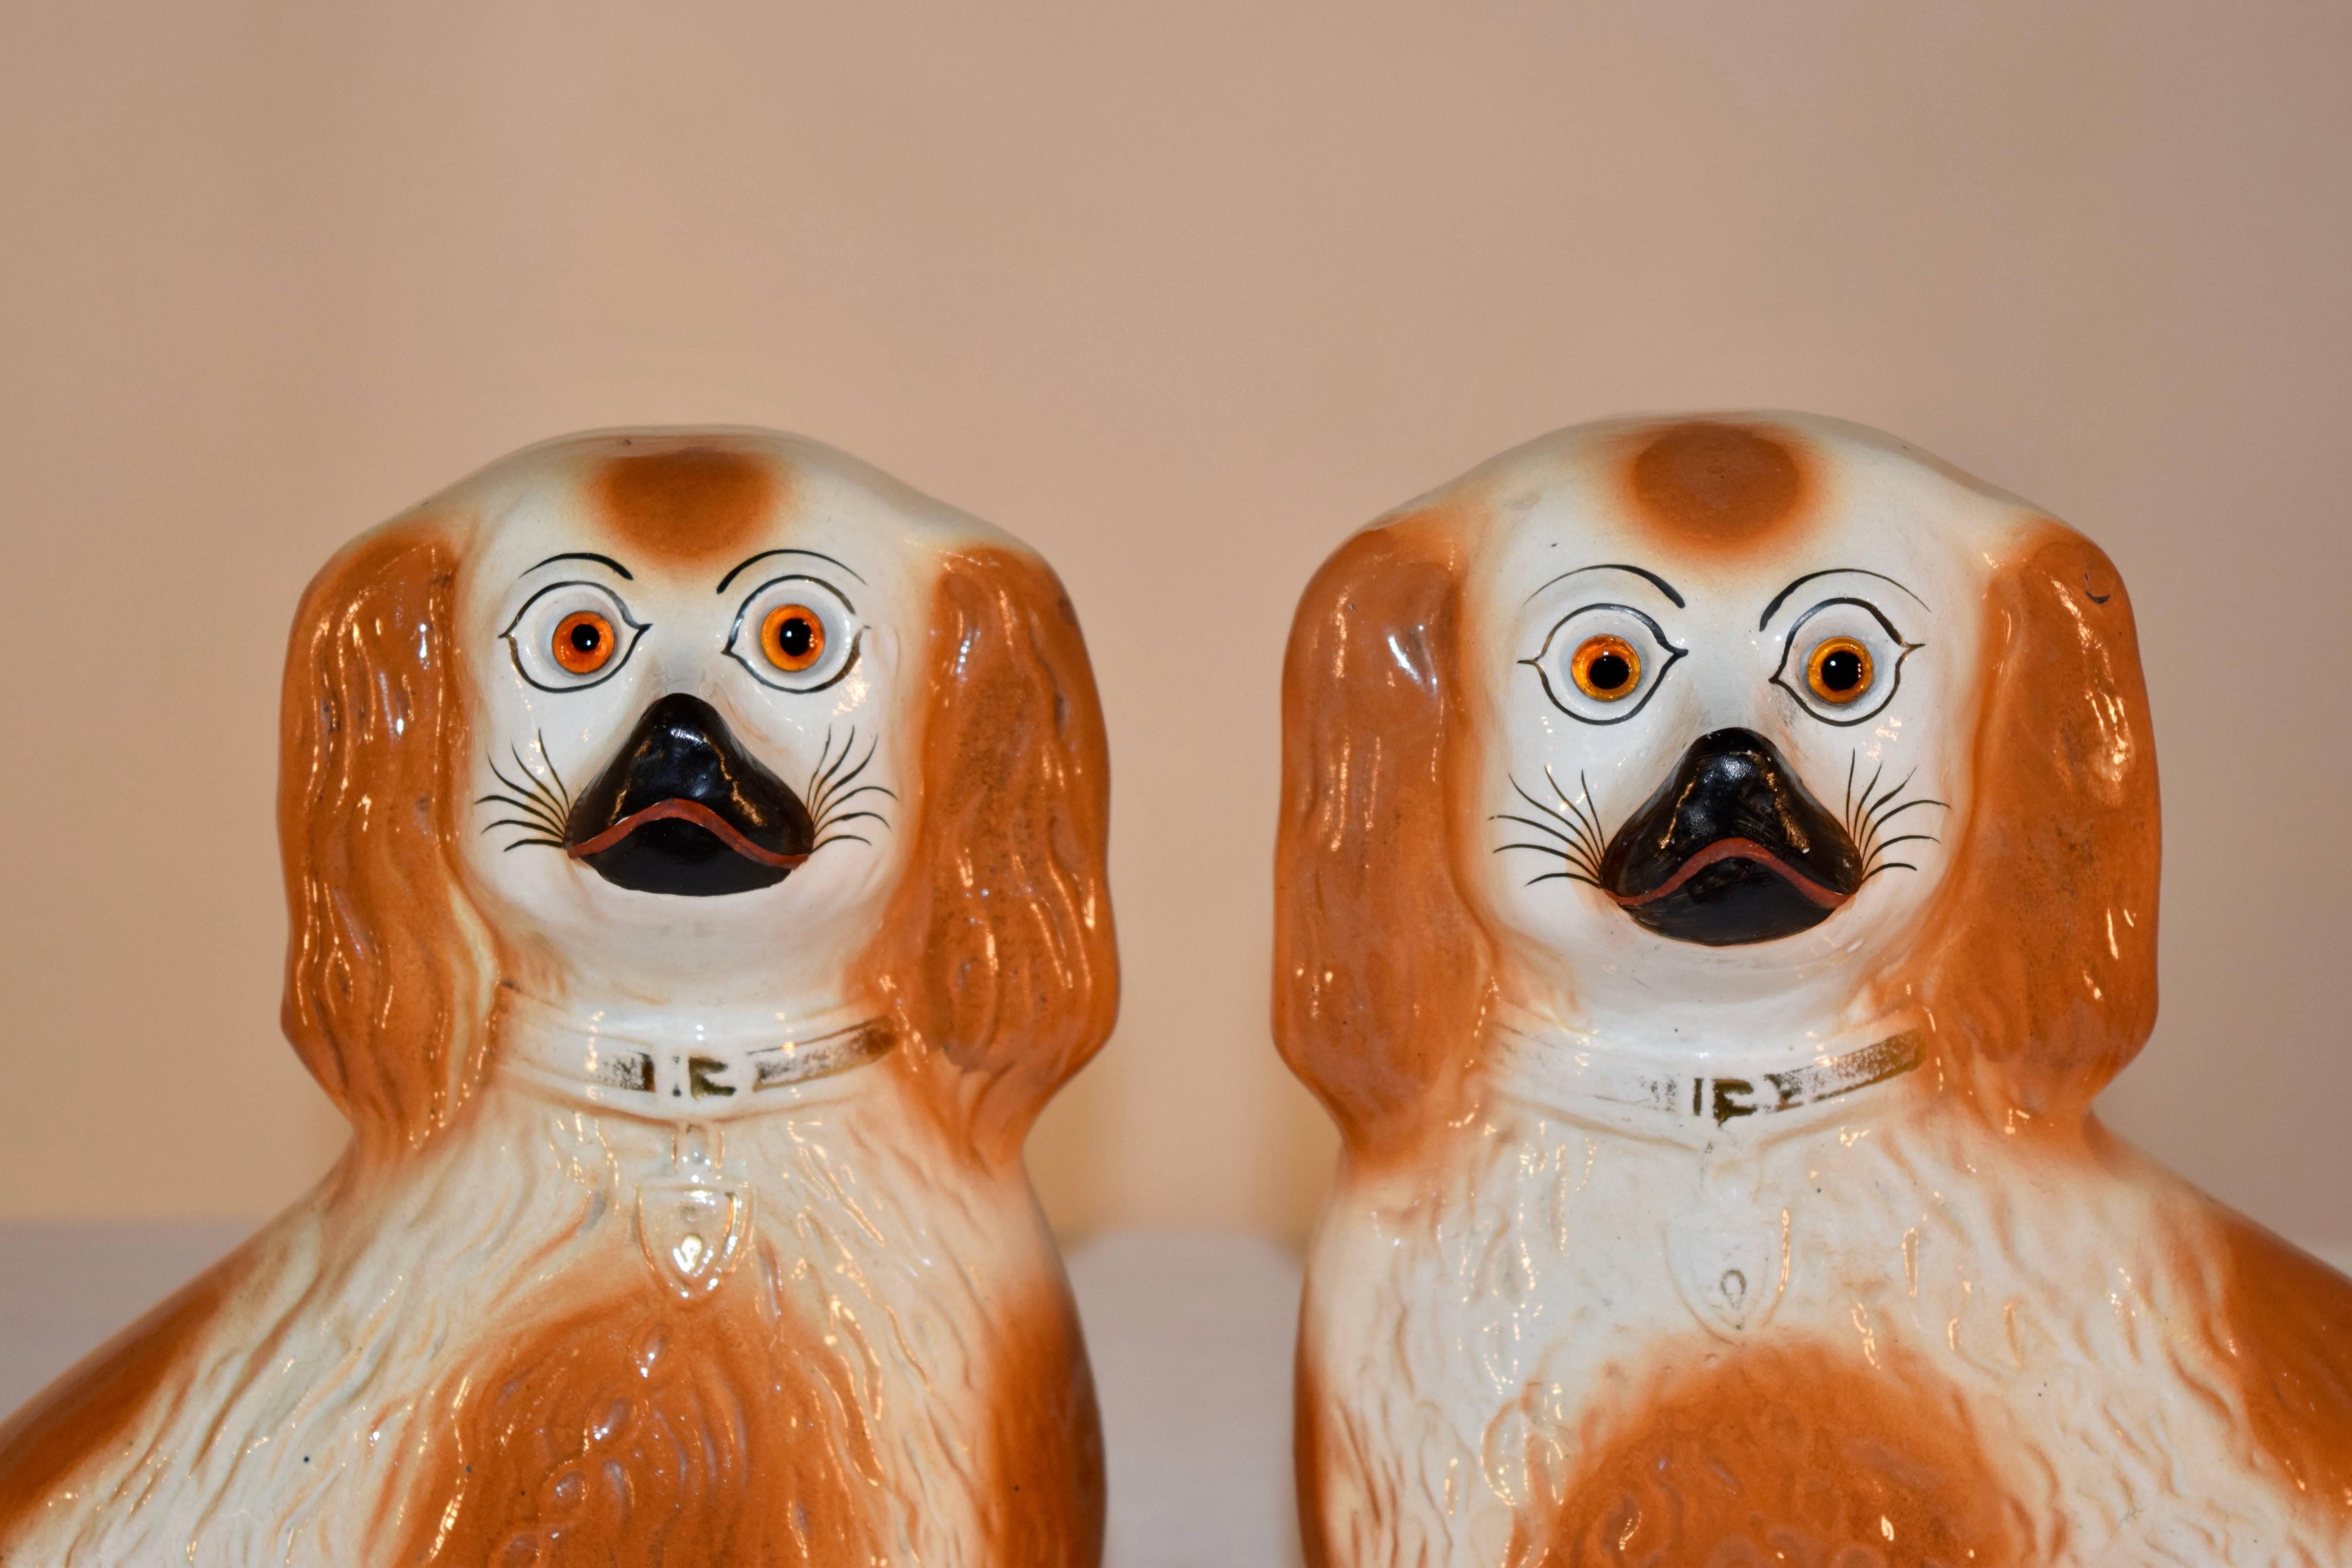 19th century pair of lovely porcelain dogs from the Staffordshire region of England. They have curly tails and glass eyes, and are decorated in a rust color.